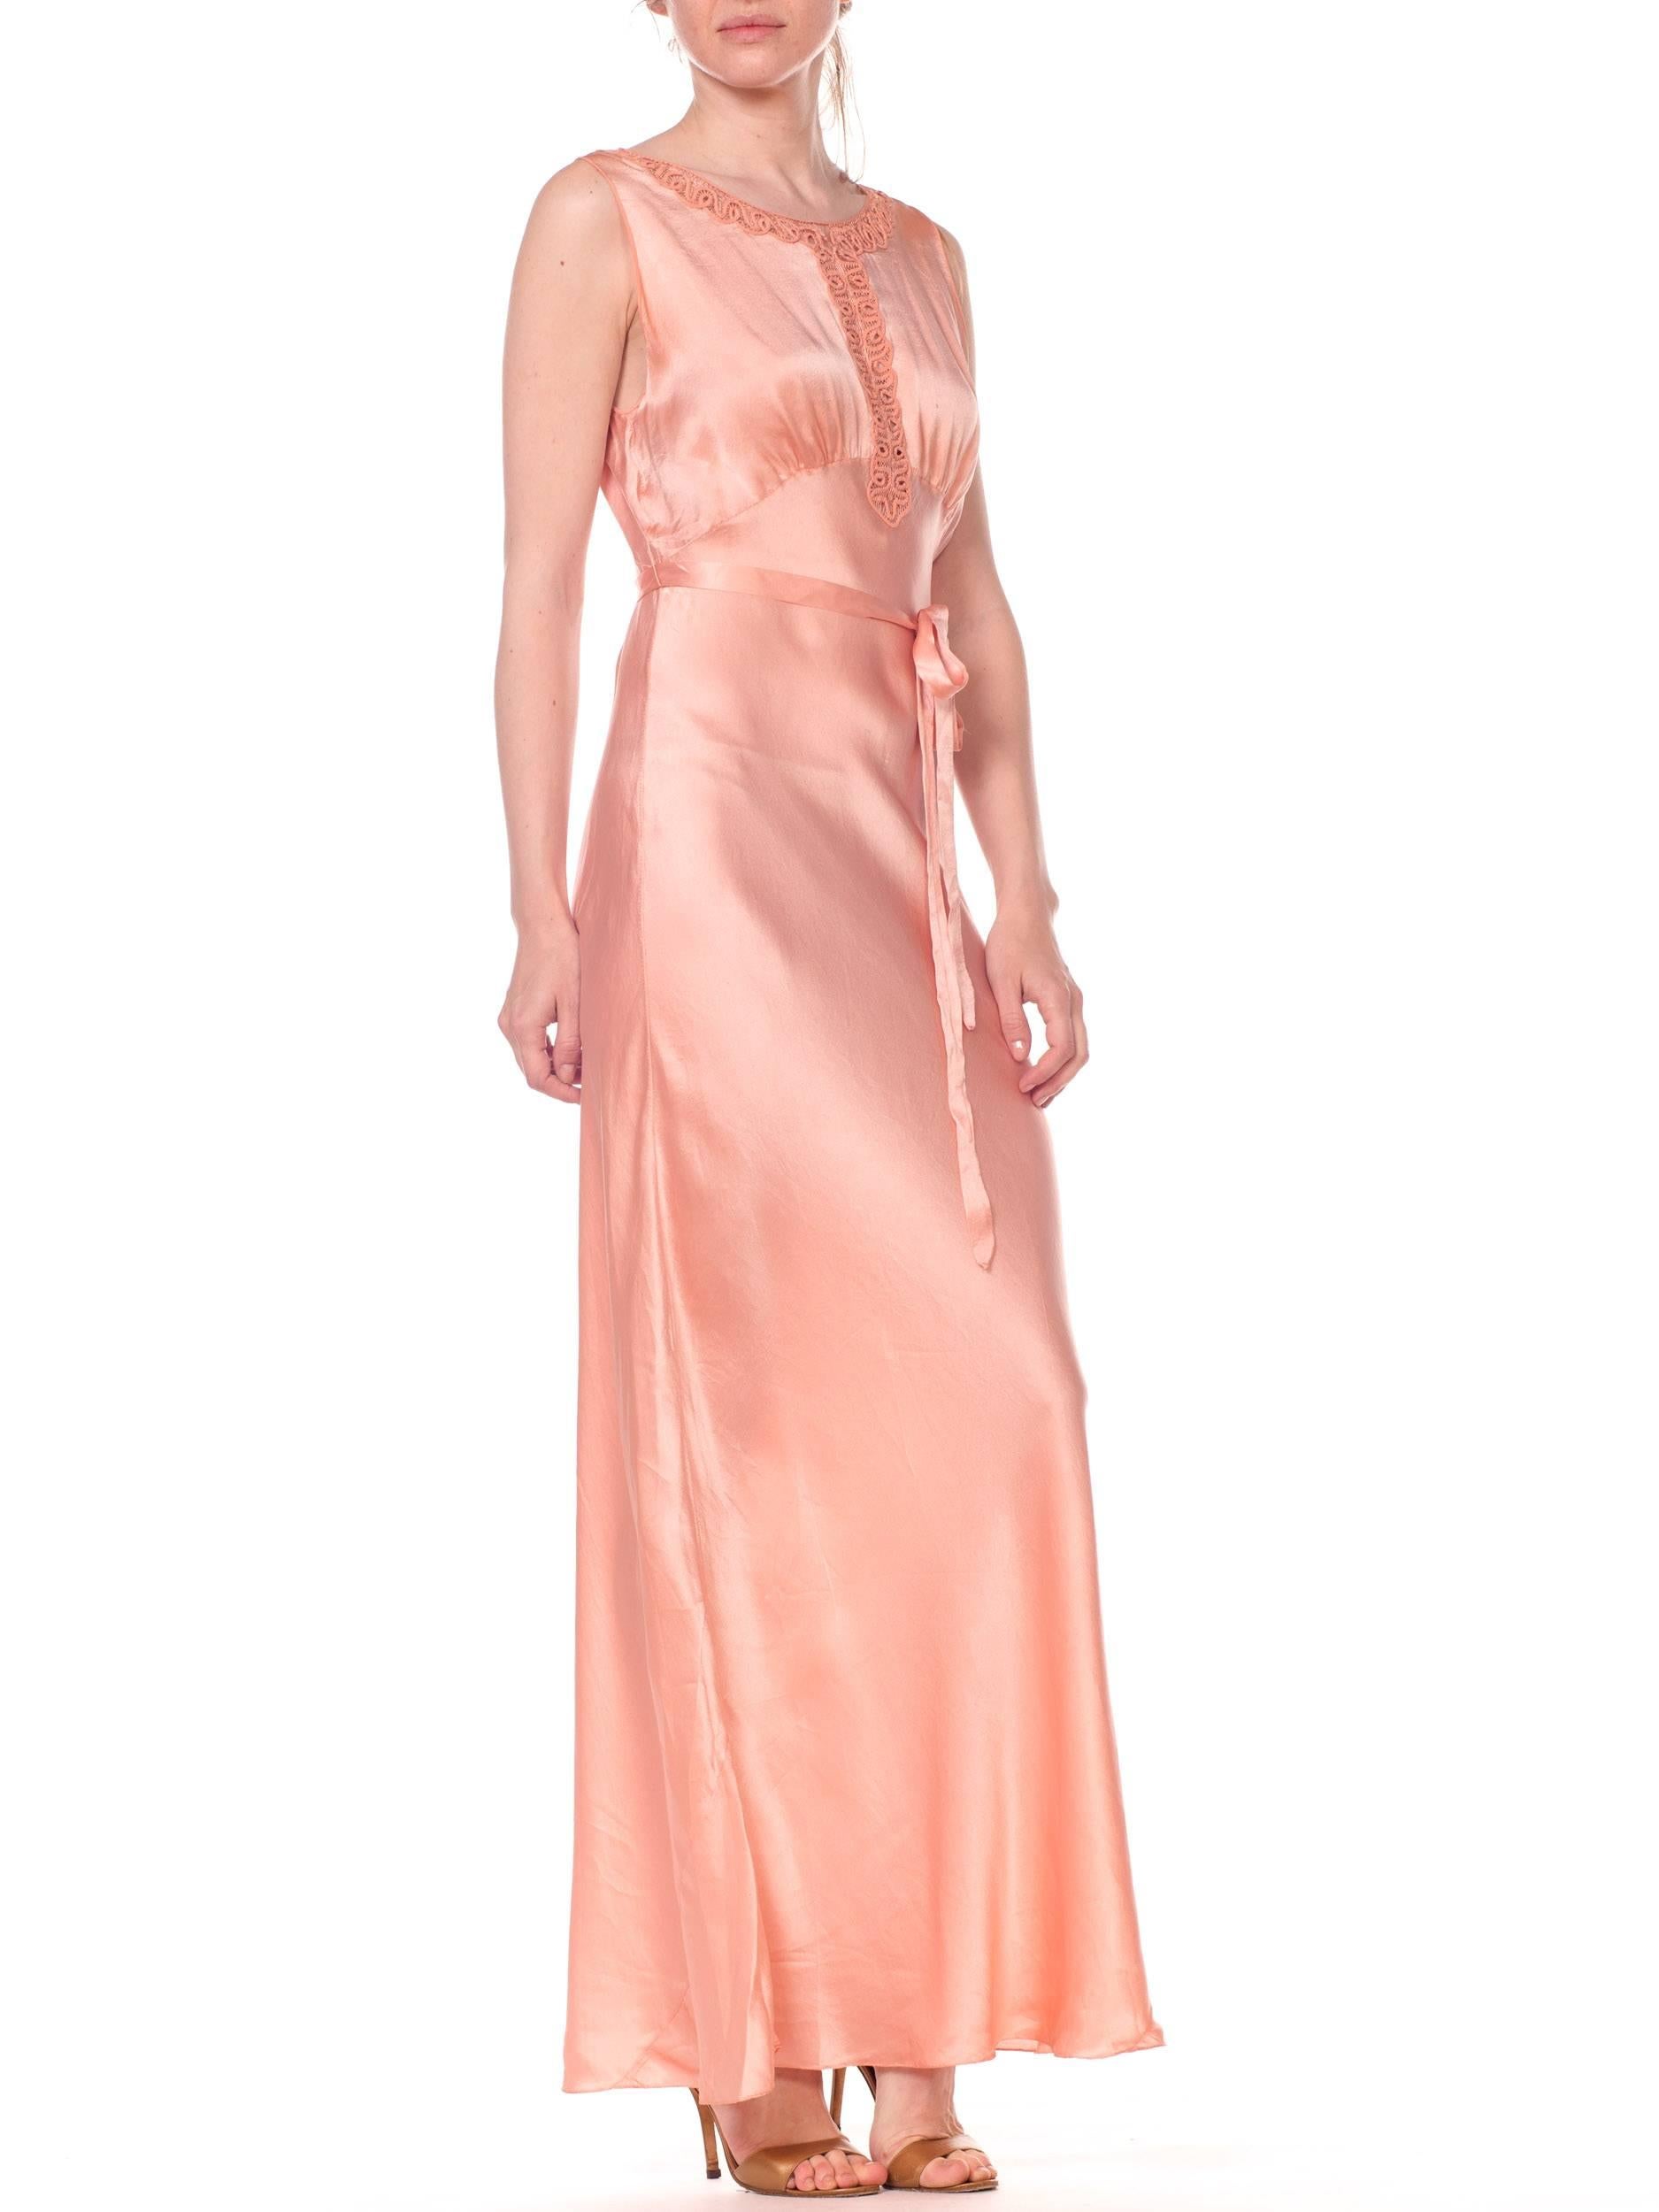 1930S Blush Pink Haute Couture Silk Charmeuse Bias Cut Negligee With Handmade Lace Neckline